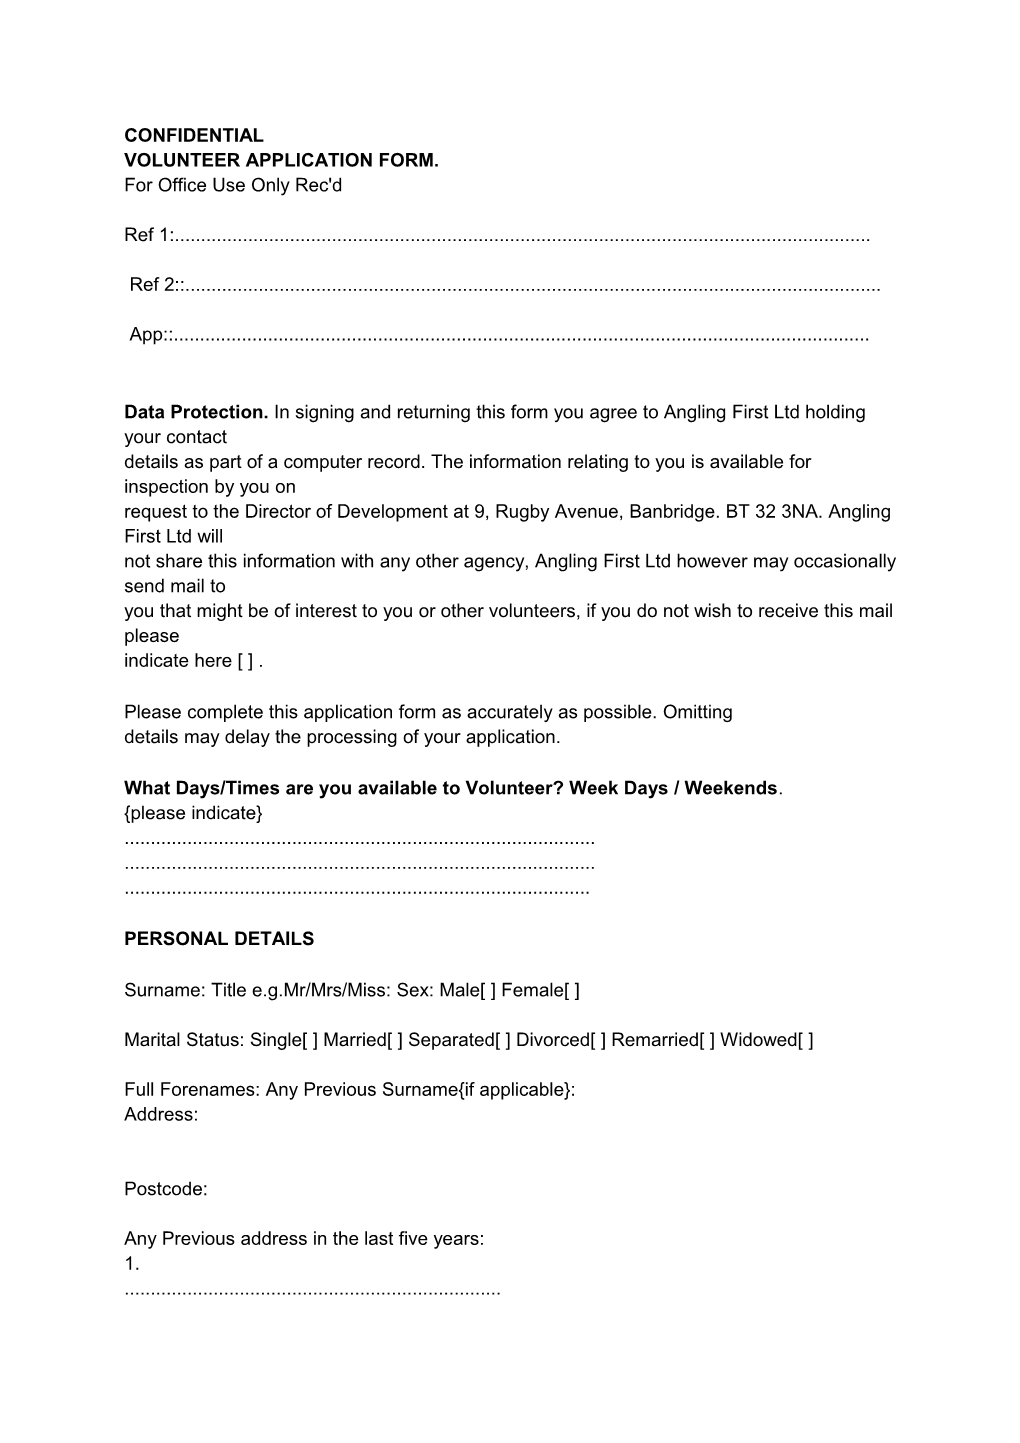 CONFIDENTIAL VOLUNTEER APPLICATION FORM. for Office Use Only Rec'd Ref 1: Ref 2 App Data